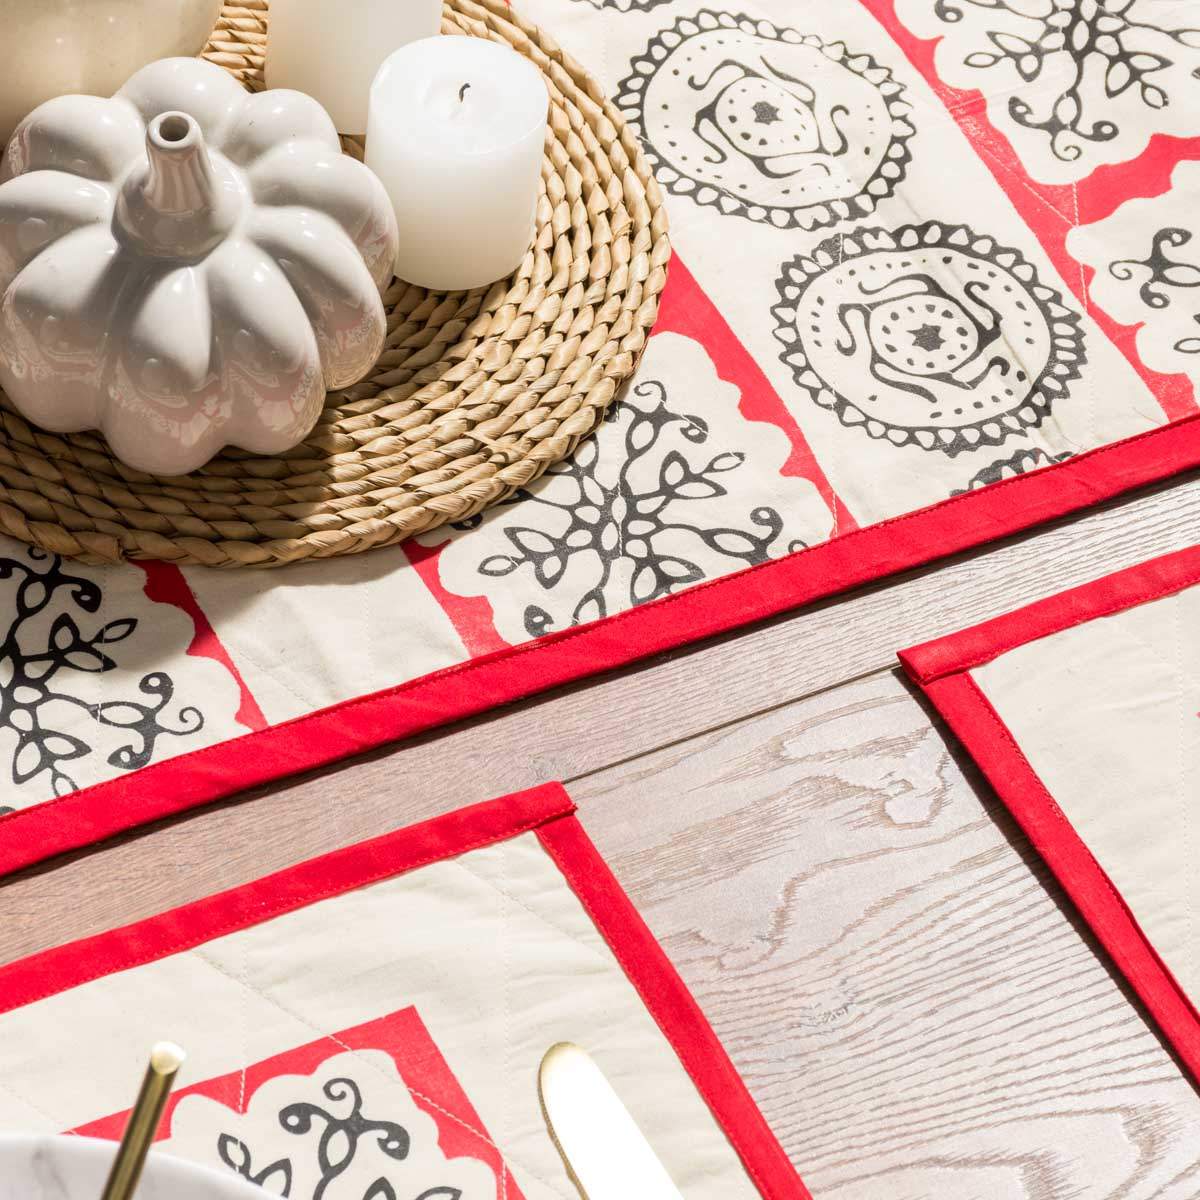 Red Table Runner & Placemats Set